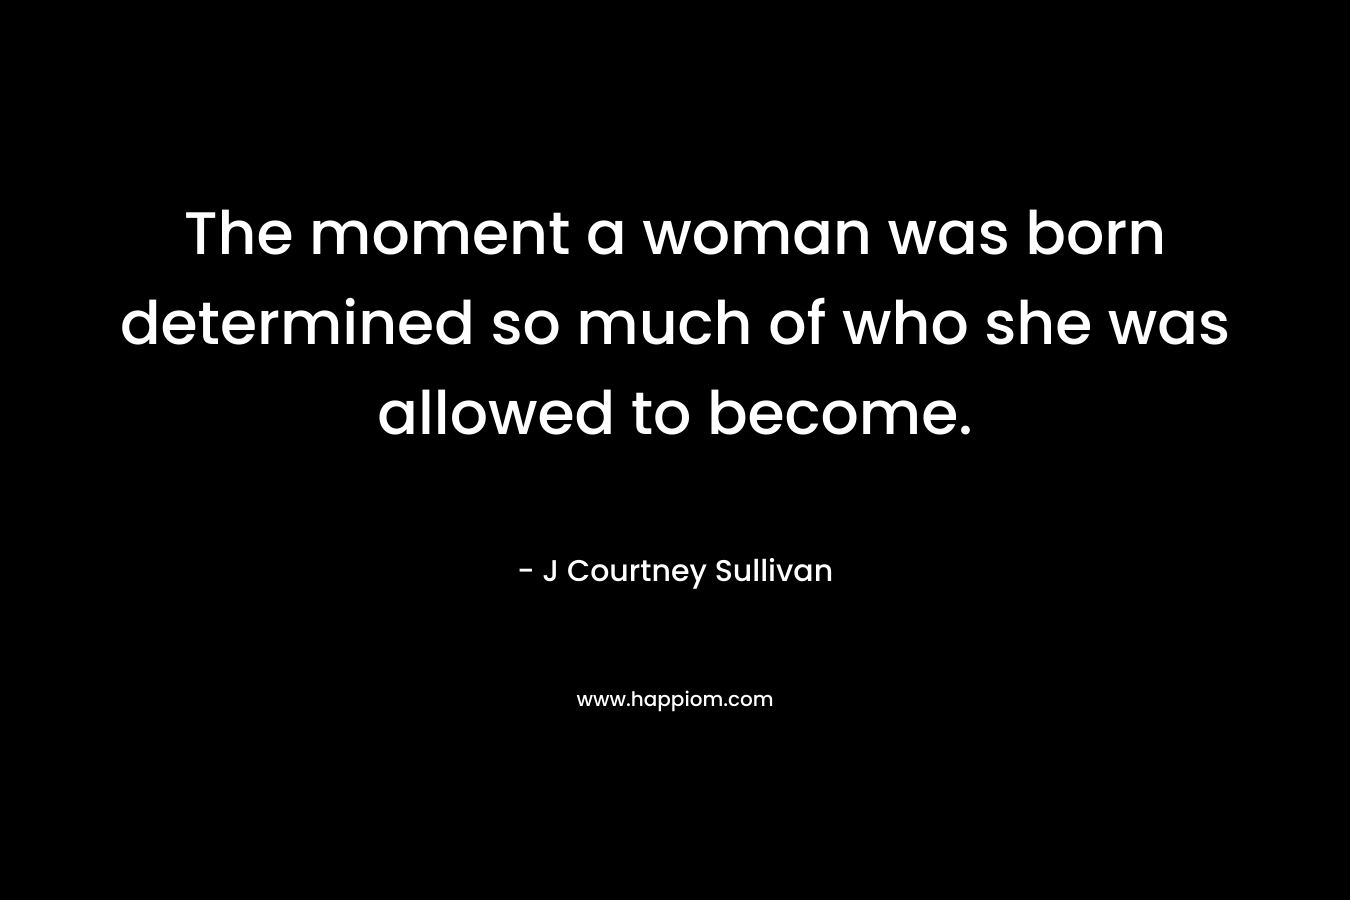 The moment a woman was born determined so much of who she was allowed to become. – J Courtney Sullivan